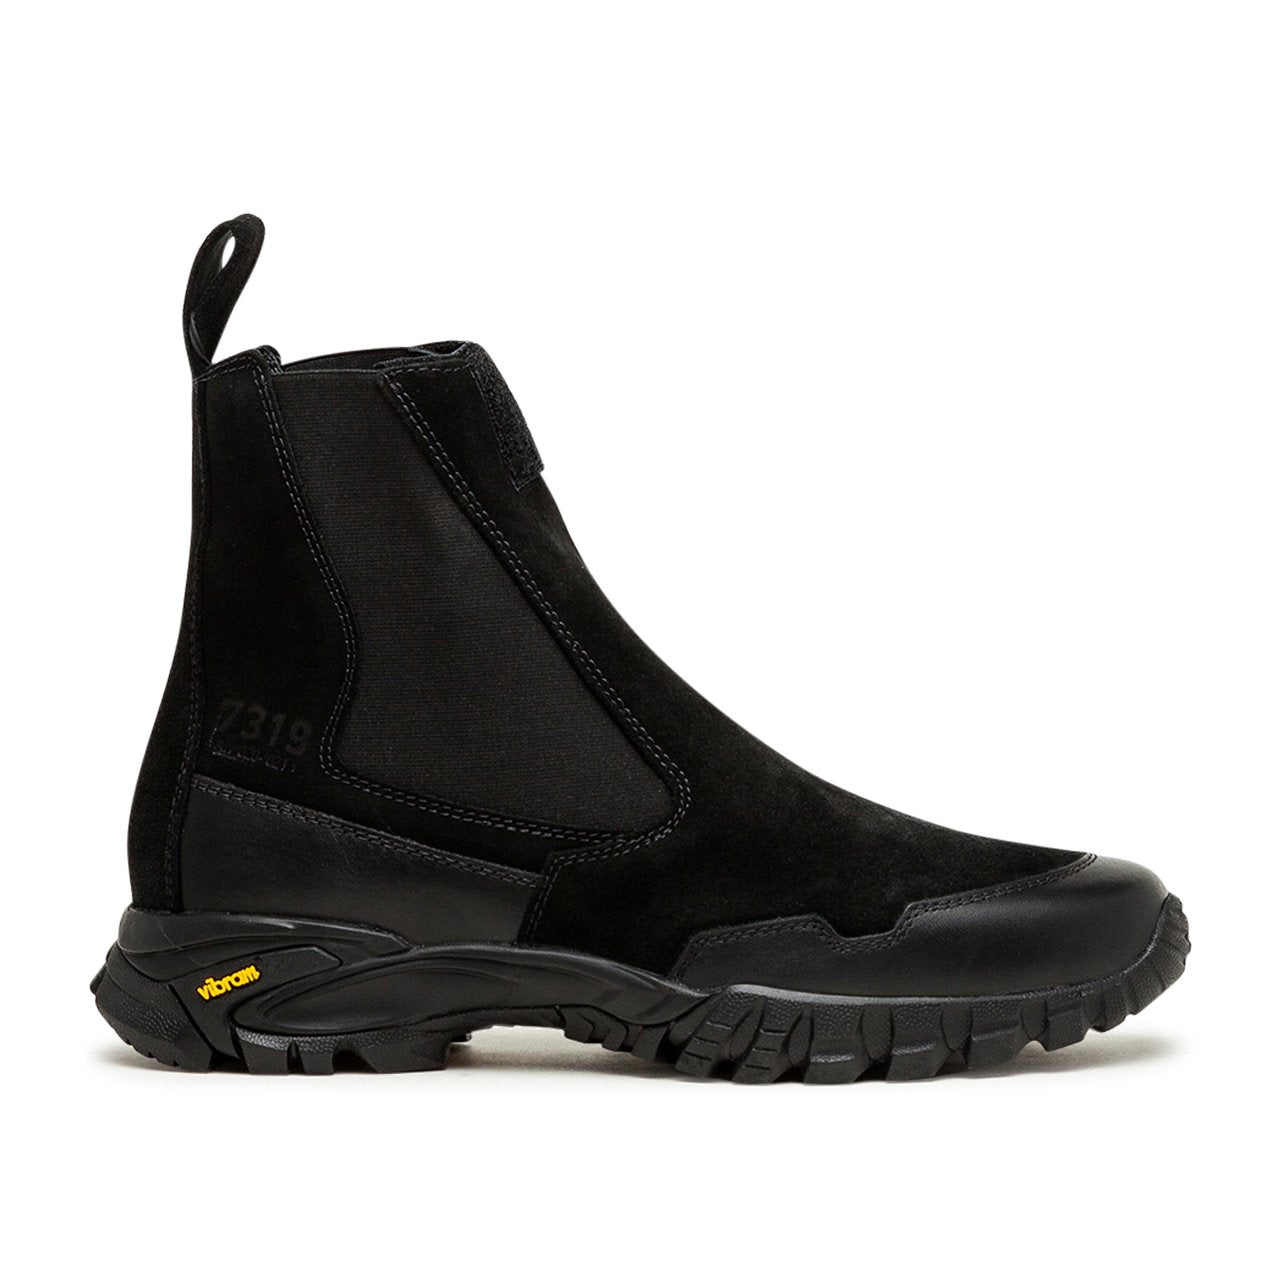 stone island shadow project velcro fastened chelsea boot (black) - 7319s0422 - a.plus - Image - 1